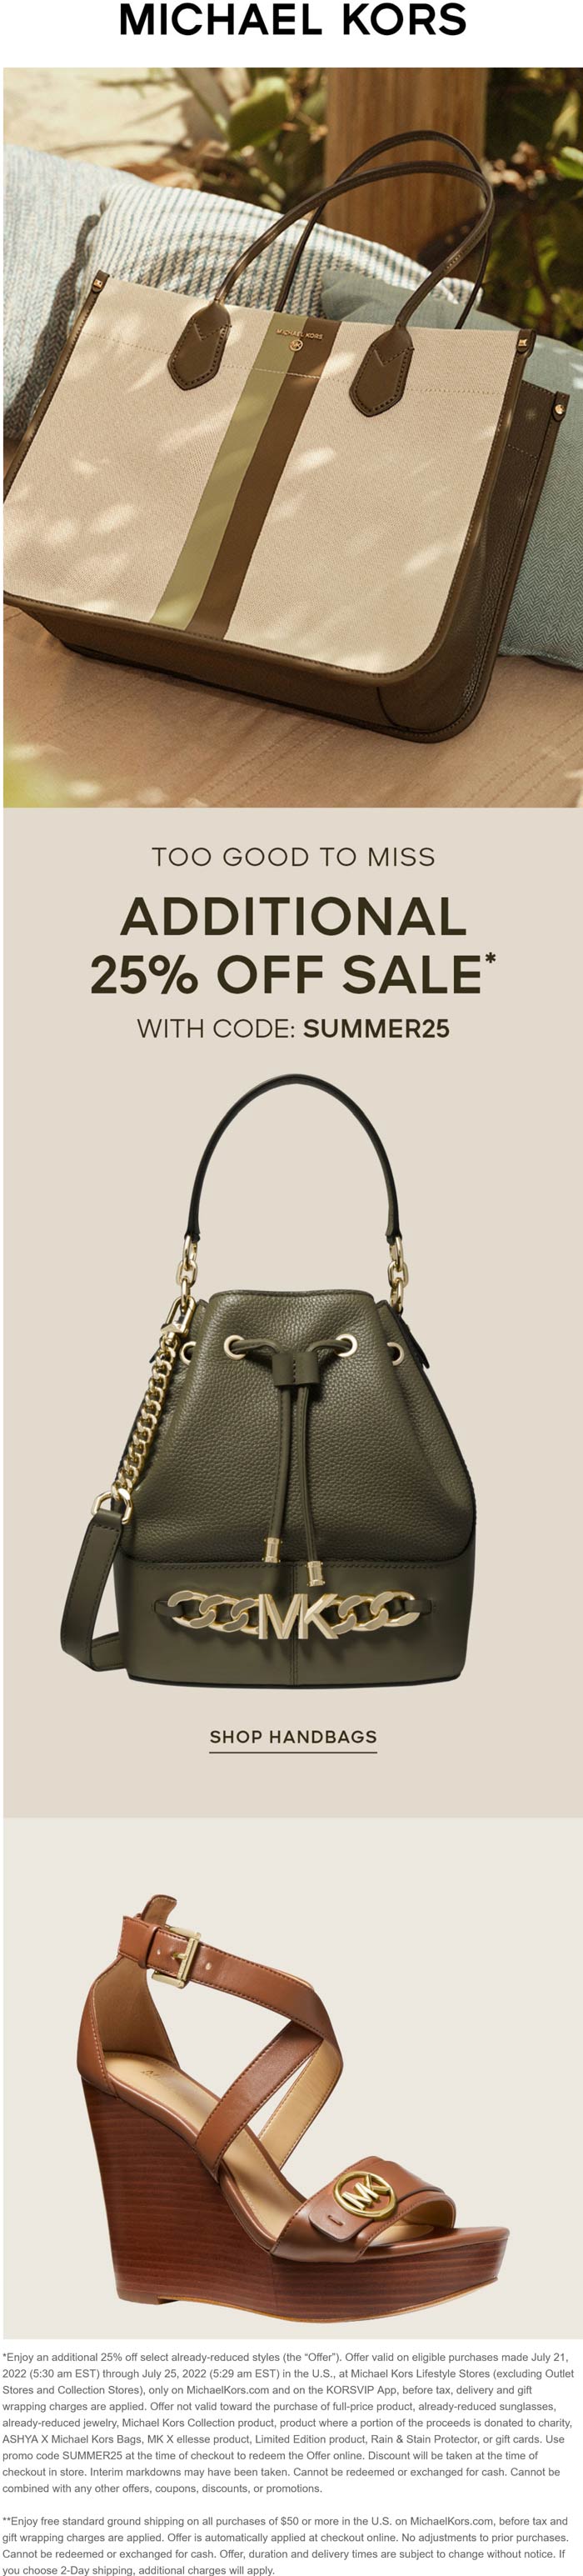 Michael Kors stores Coupon  Extra 25% off sale items at Michael Kors, or online via promo code SUMMER25 #michaelkors 